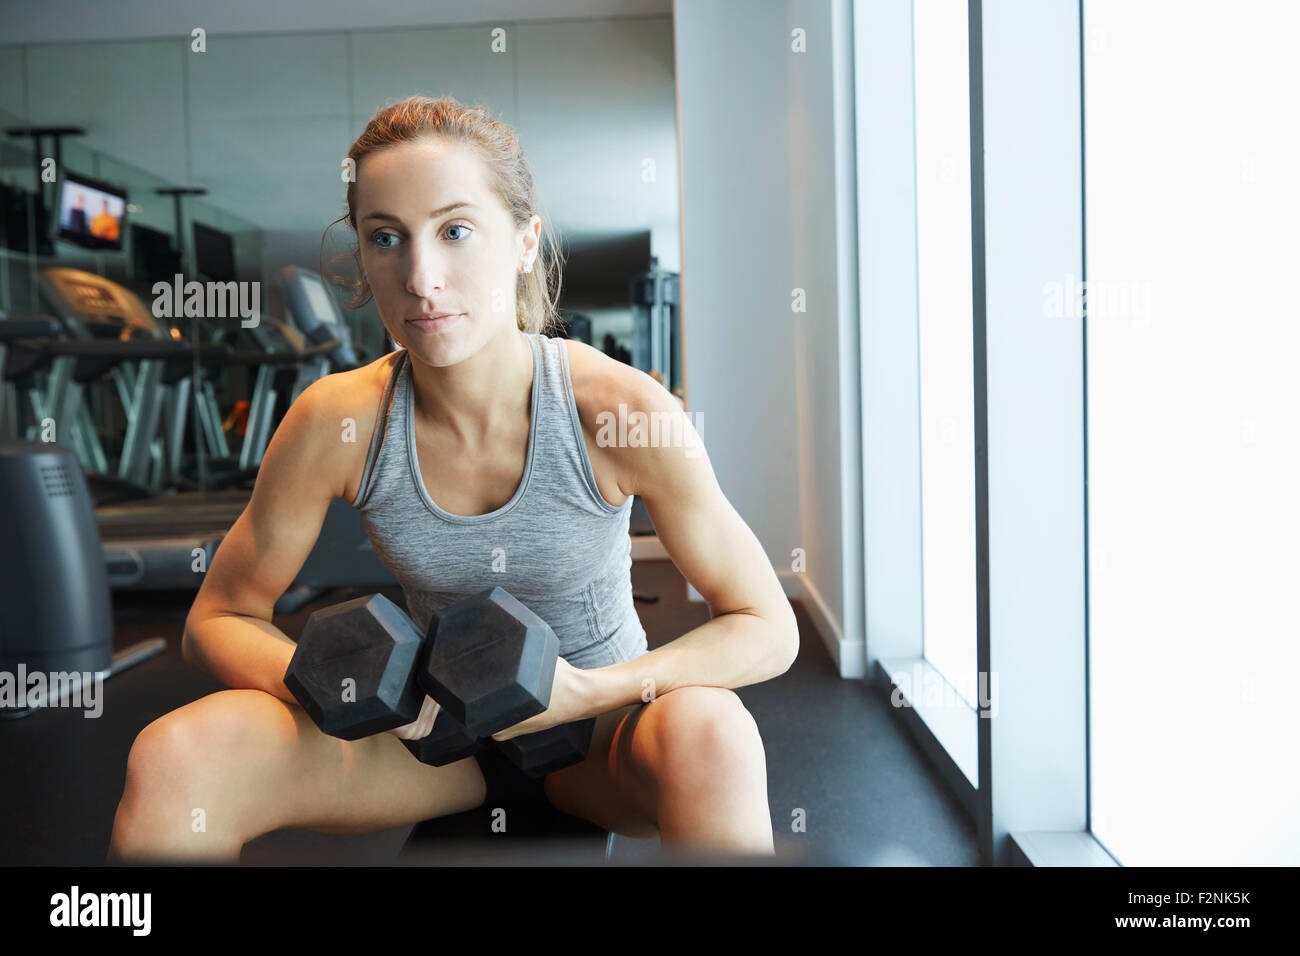 Serious woman lifting weights in gym Stock Photo